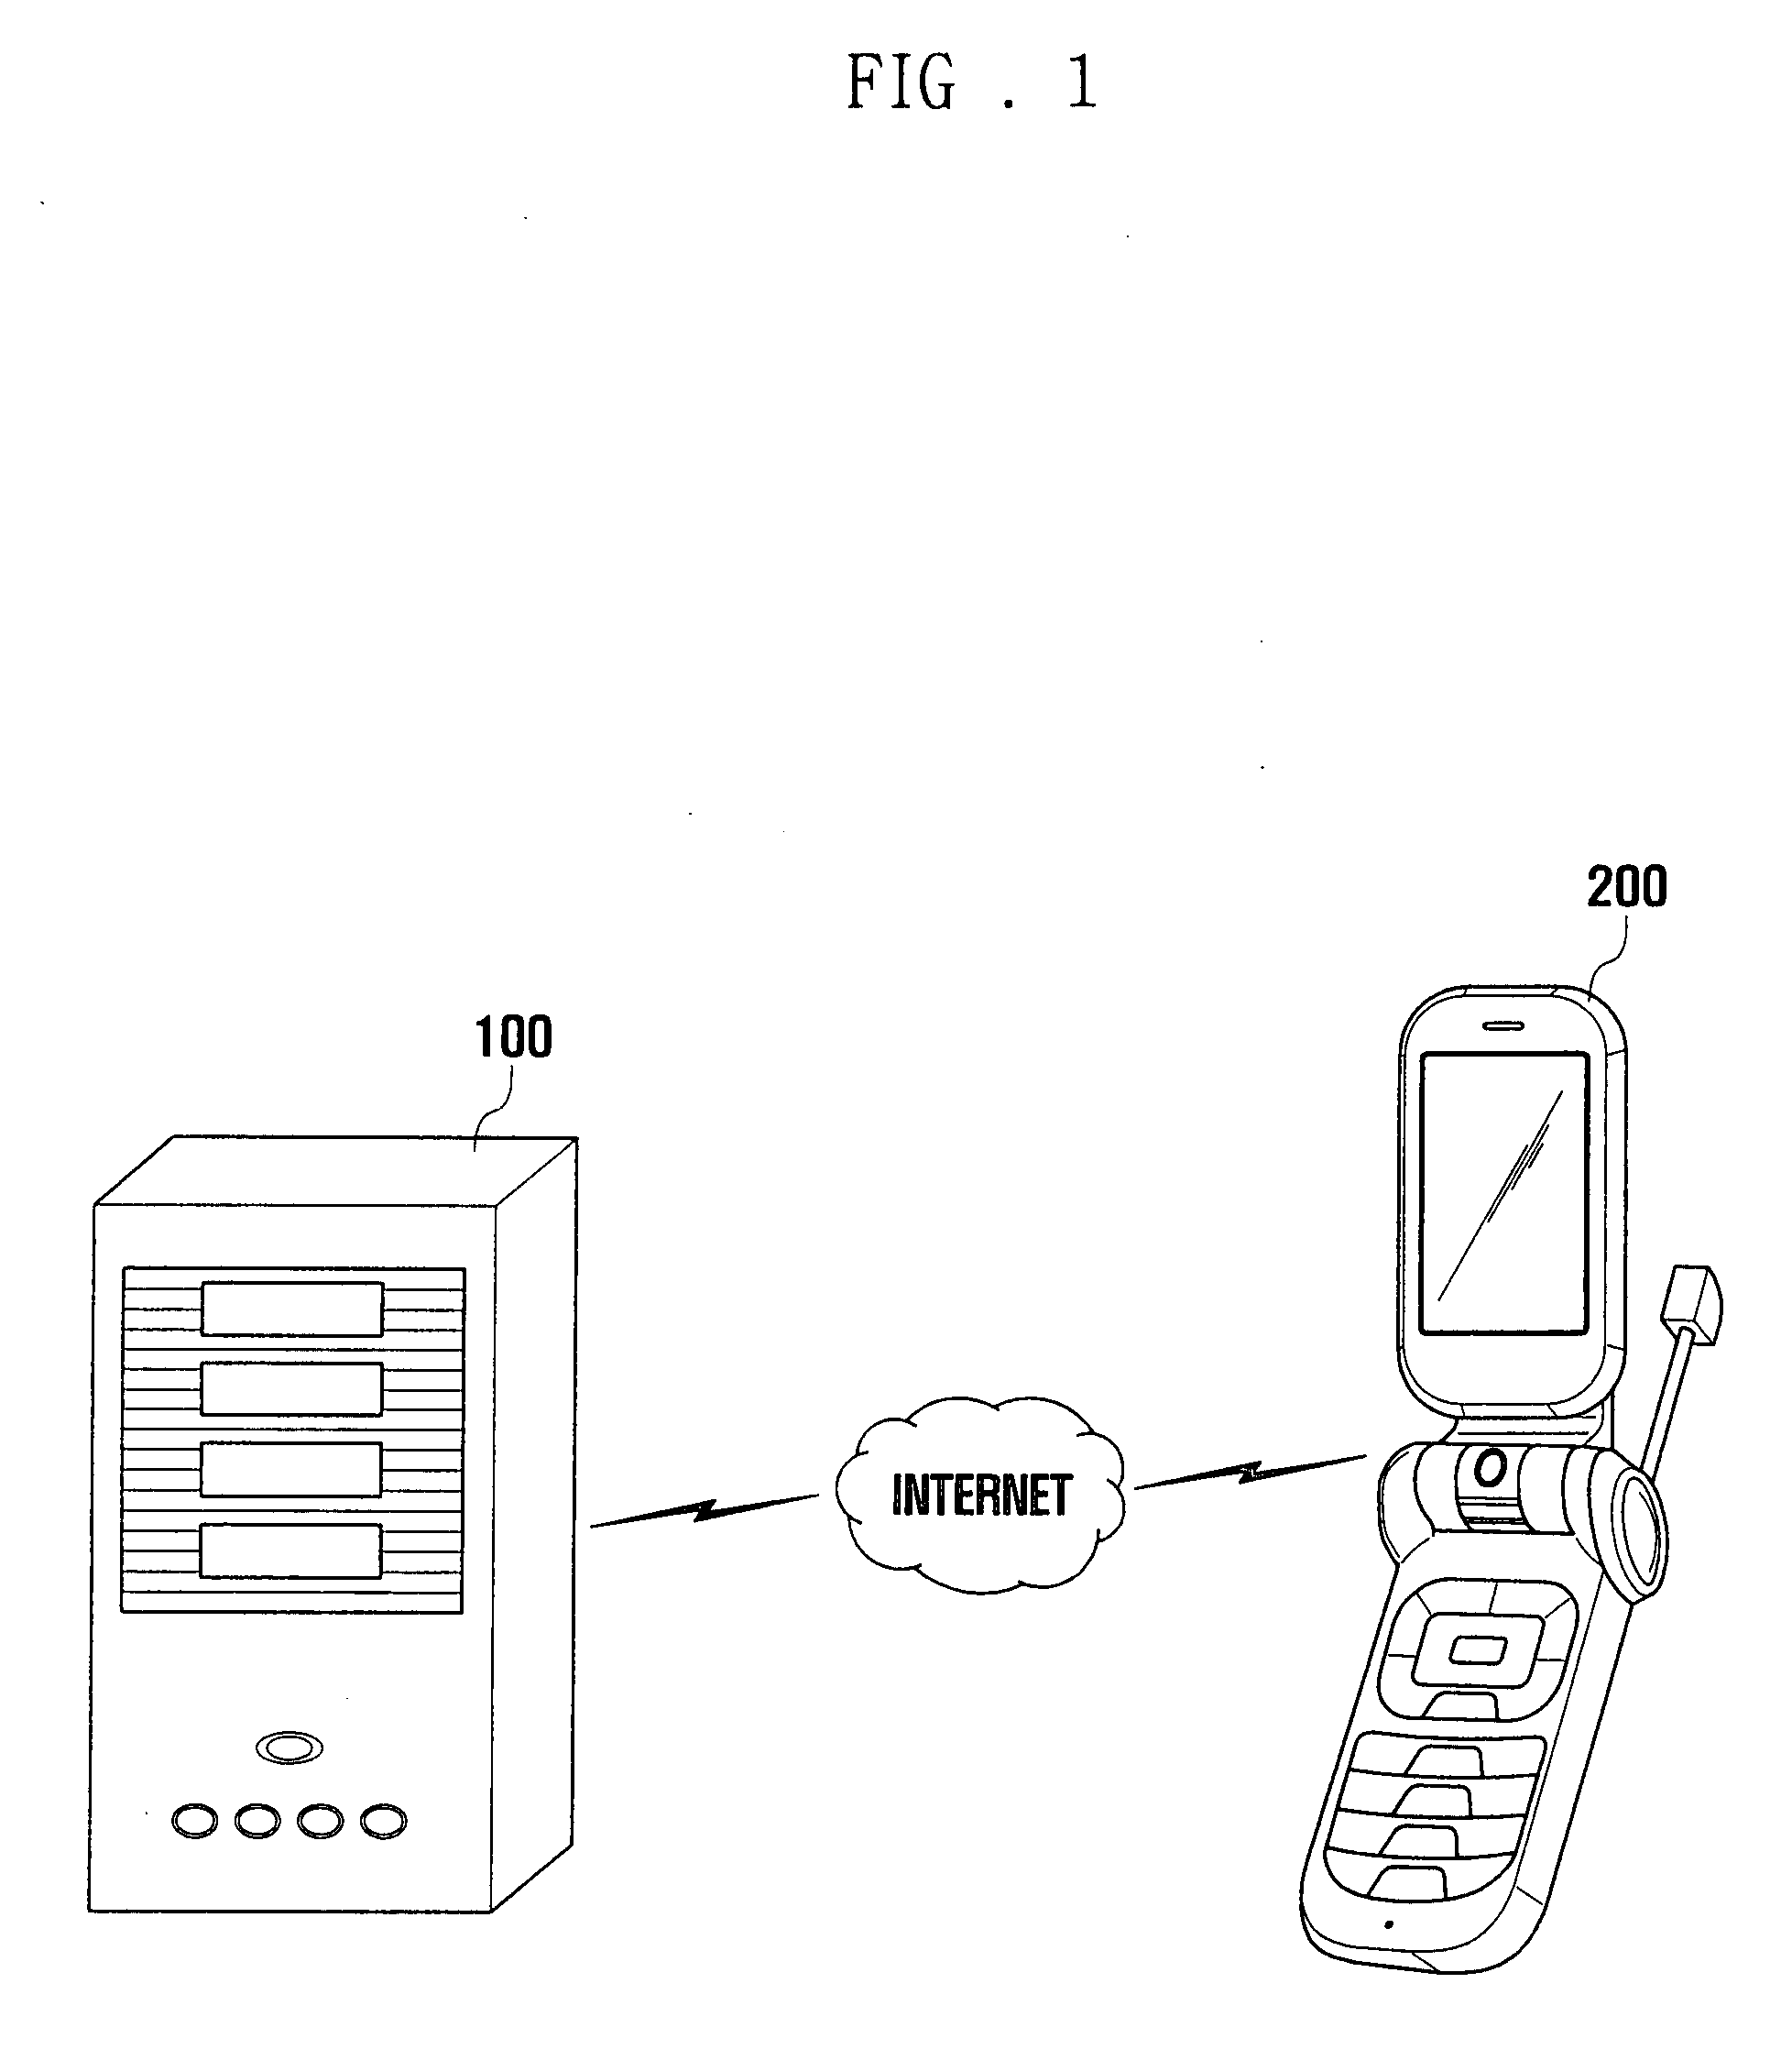 System and method for protecting copyrights of digital content